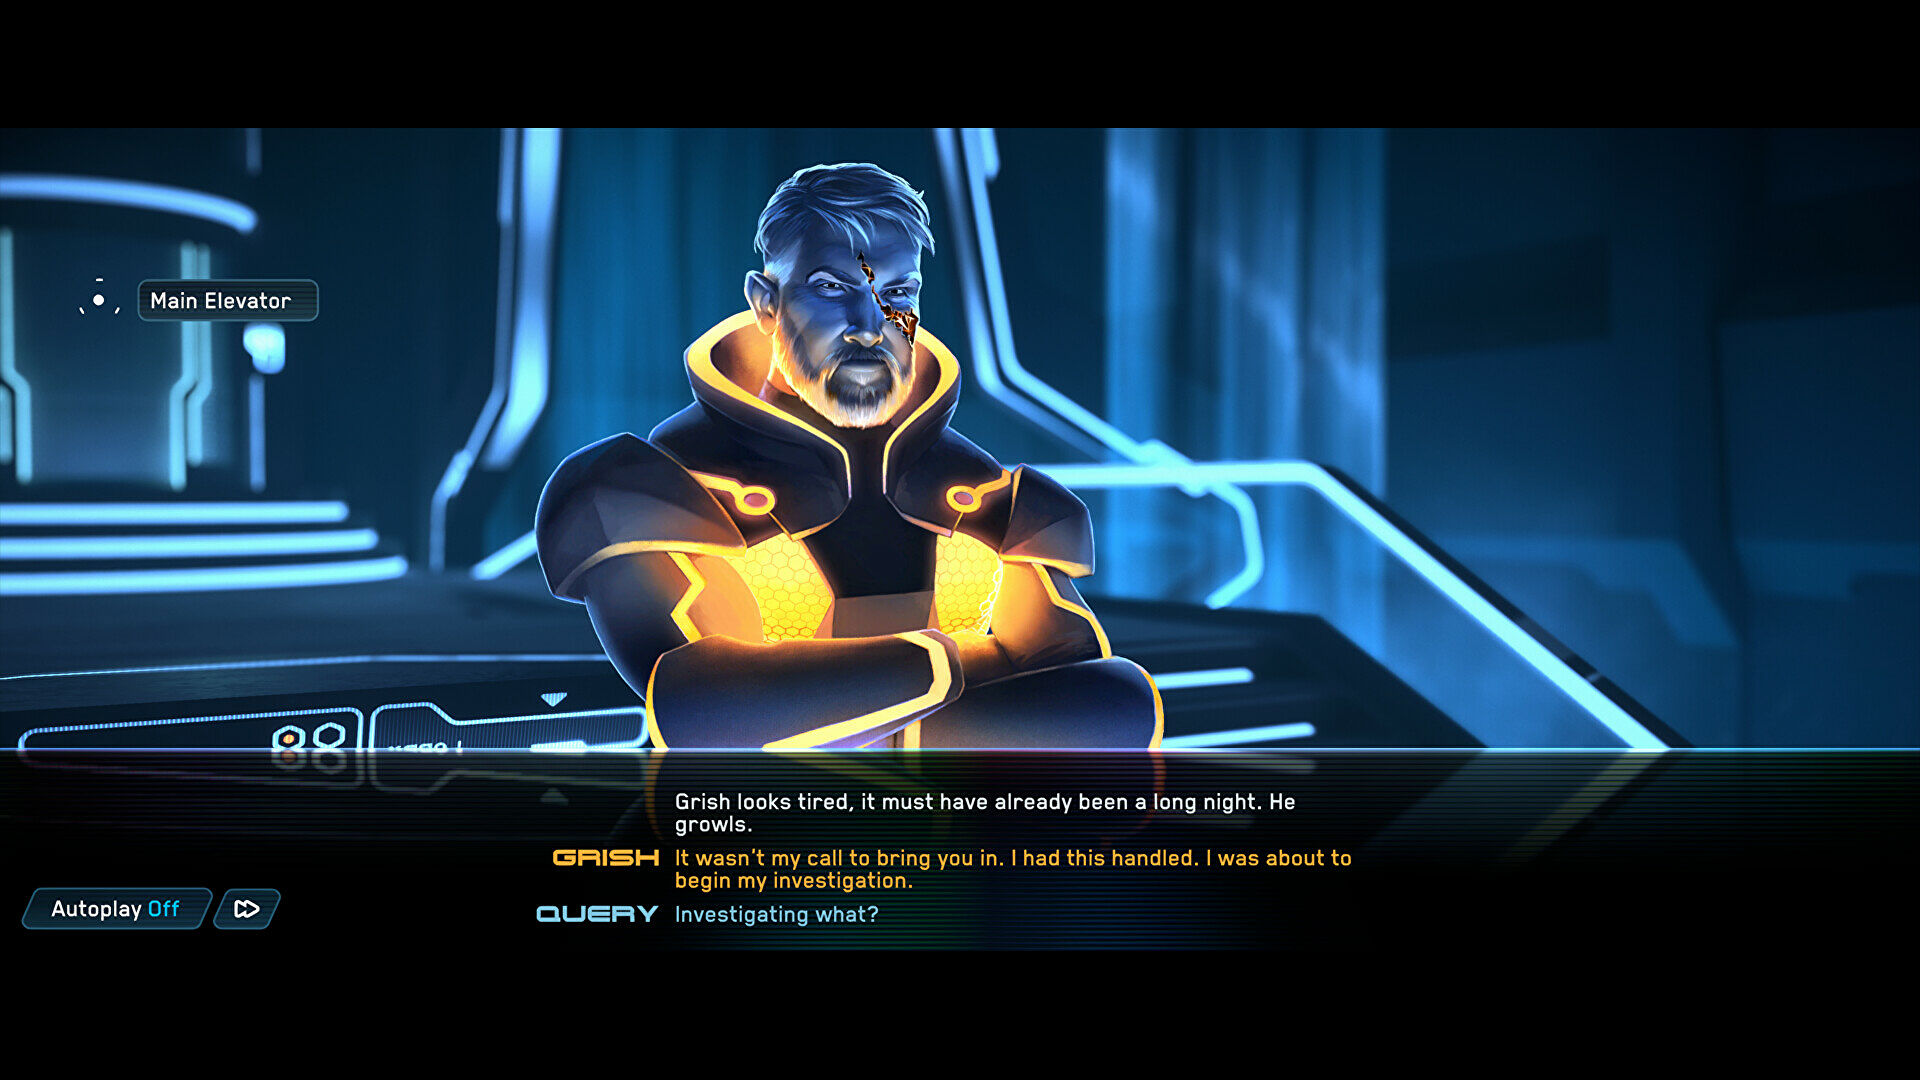 Tron: Identity is a new visual novel from Bithell Games